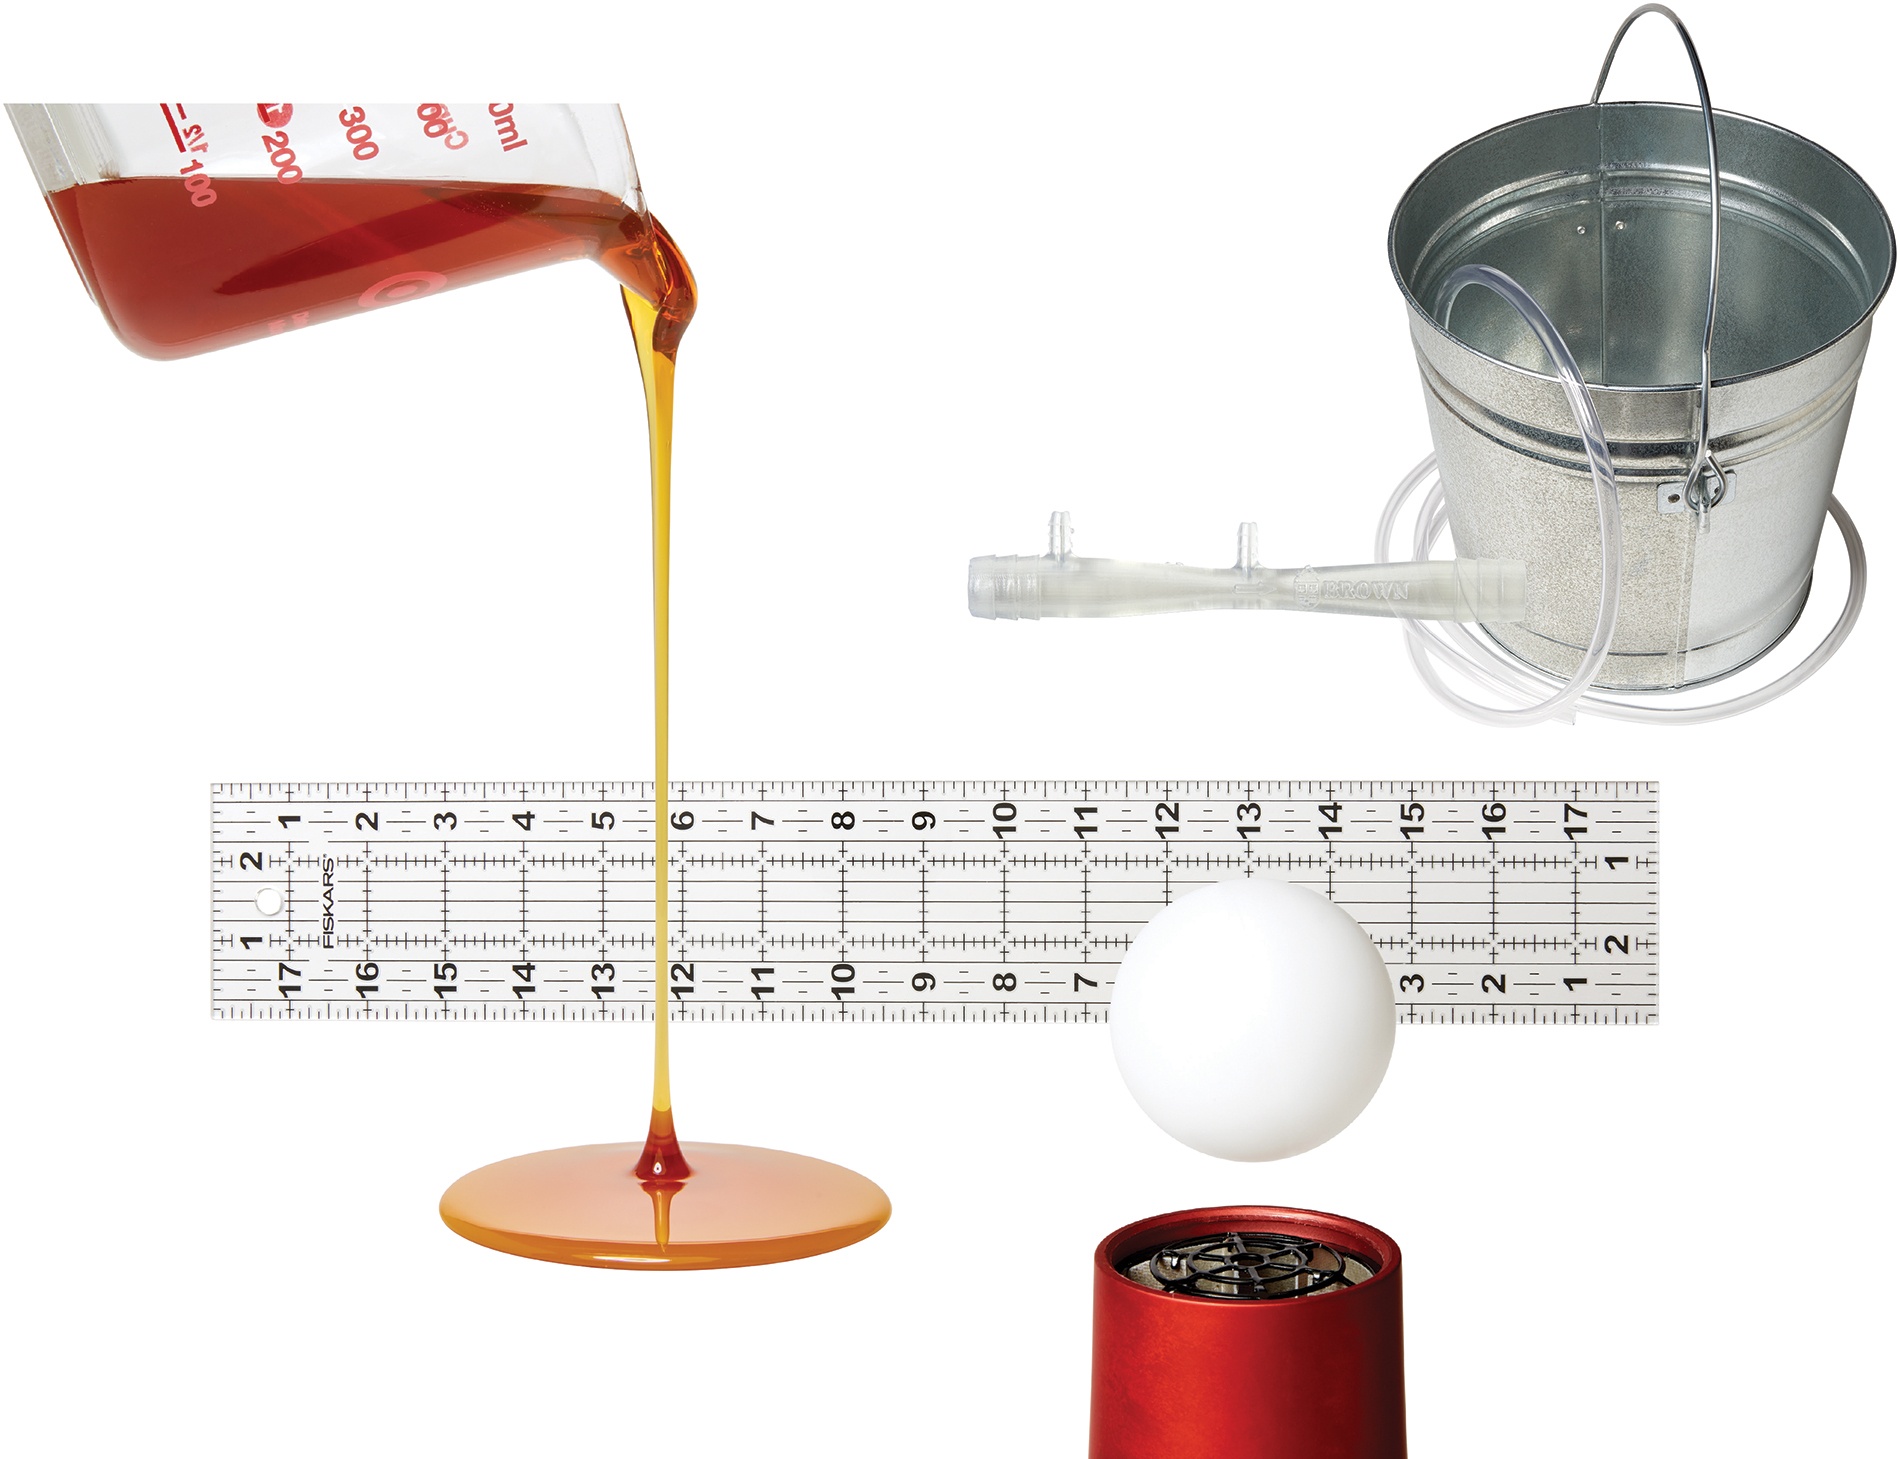 photo of at-home experiment tools